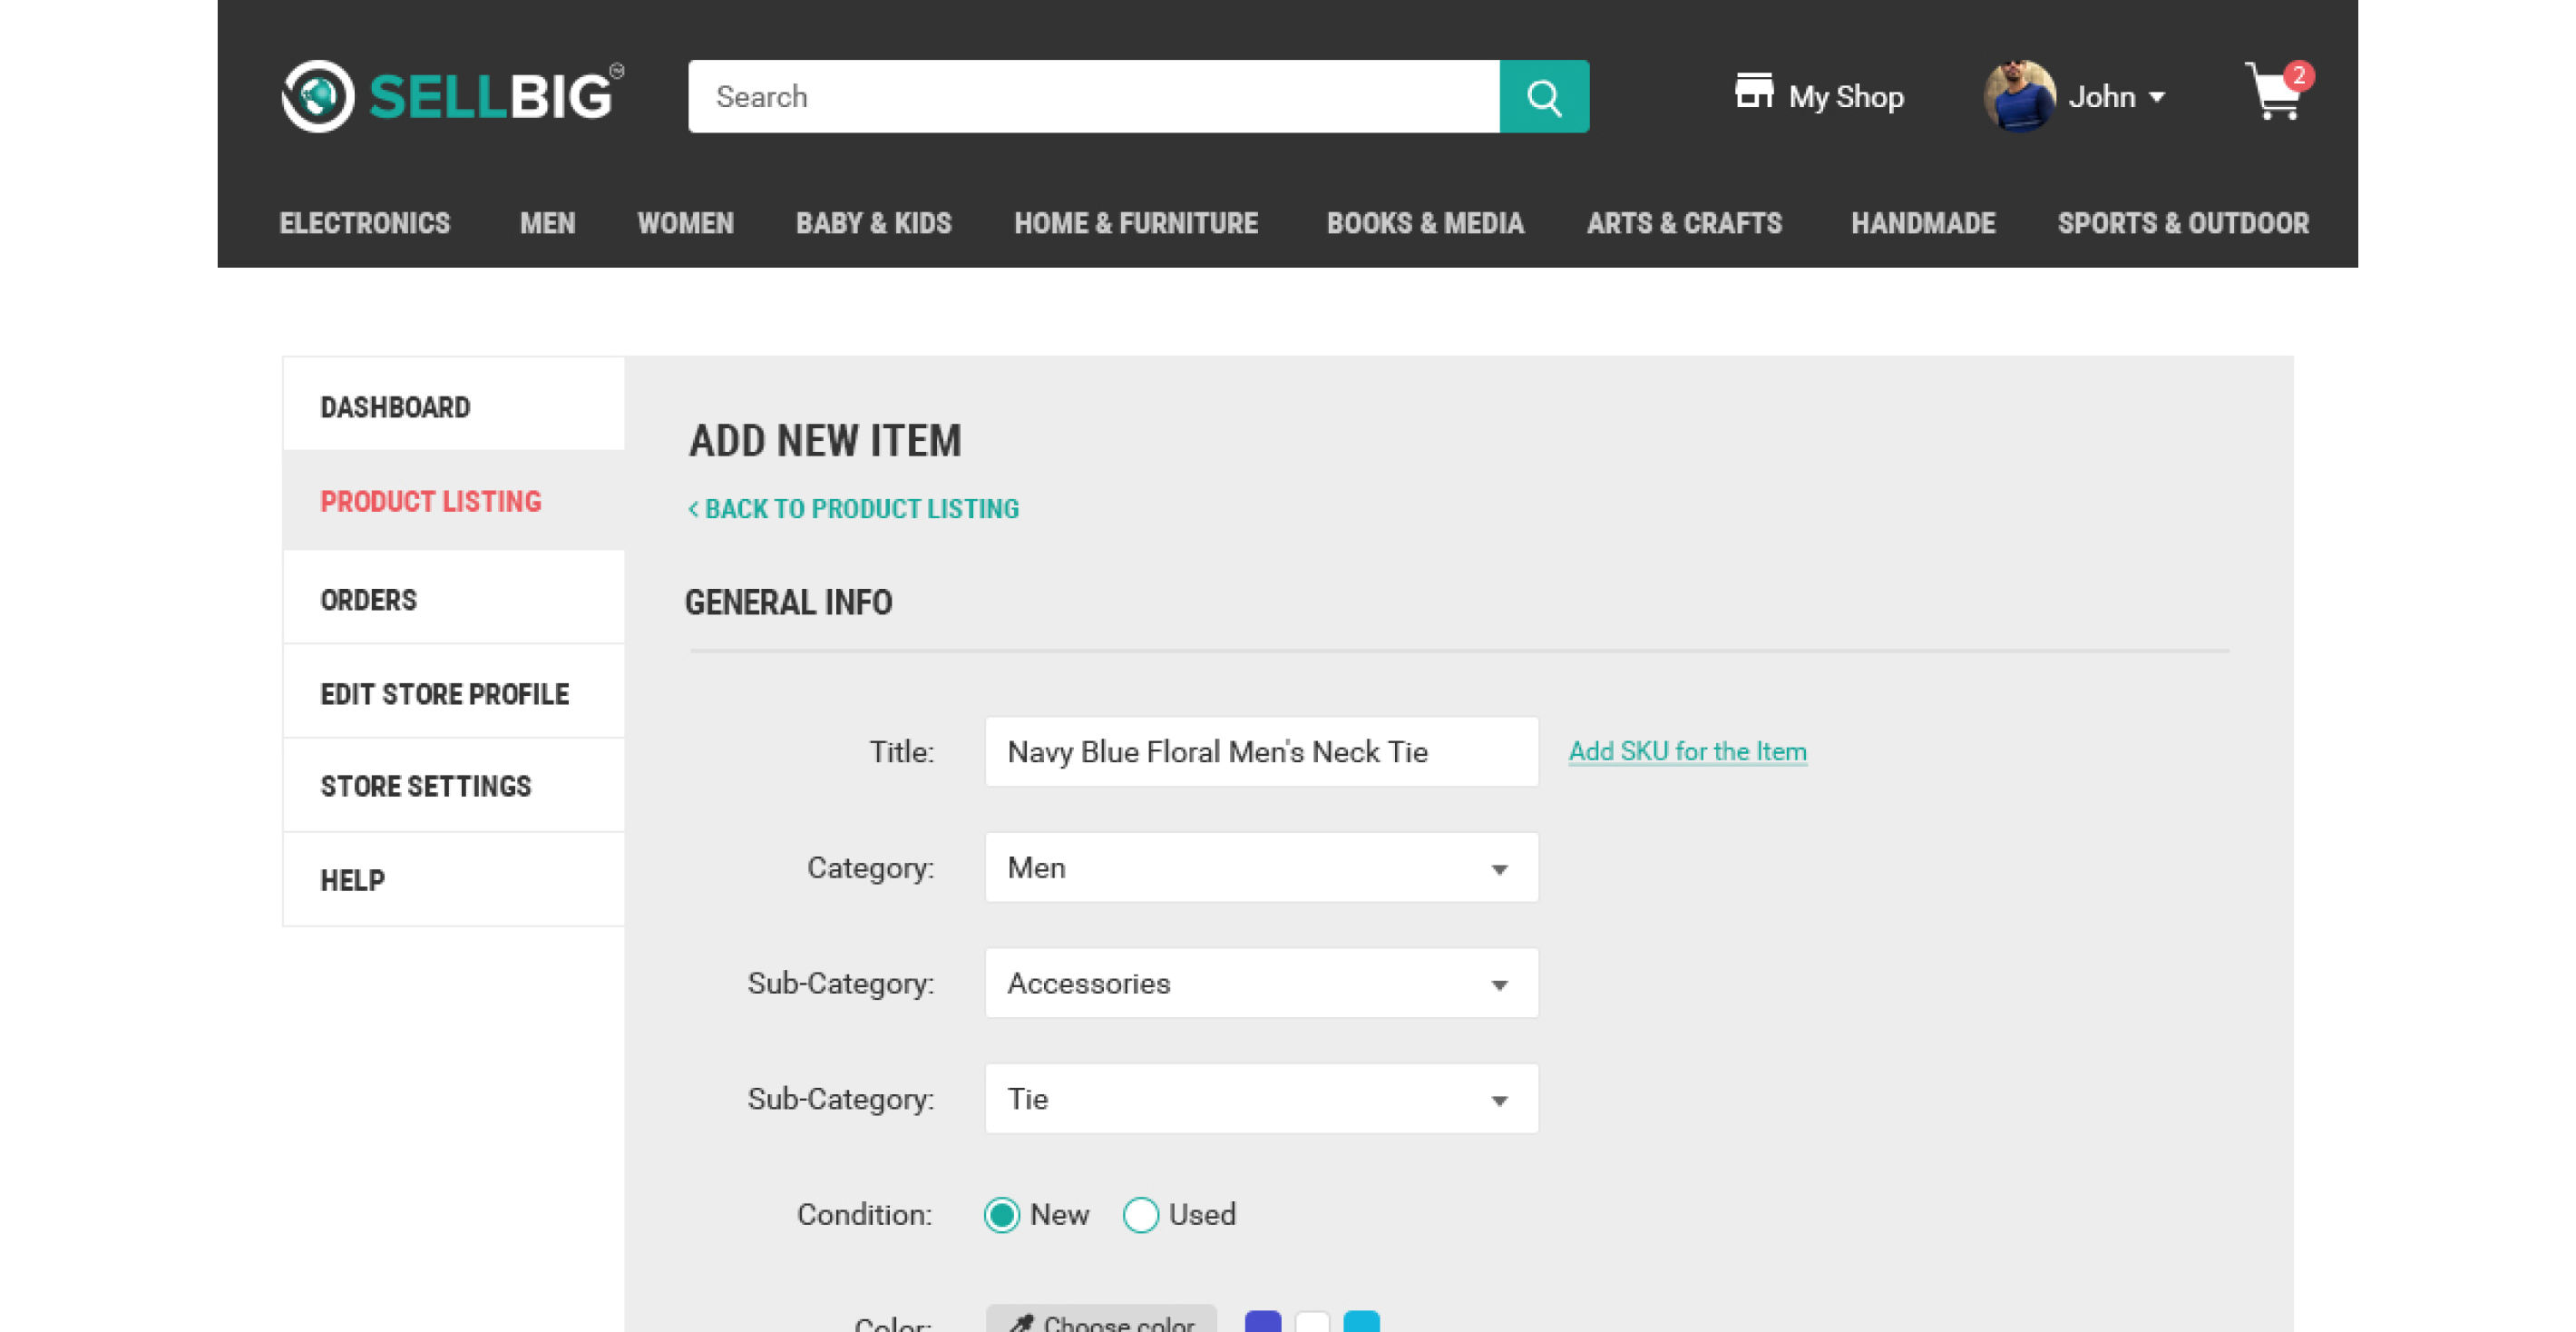 A frame for adding new items for listing on the Sellbig ecommerce marketplace